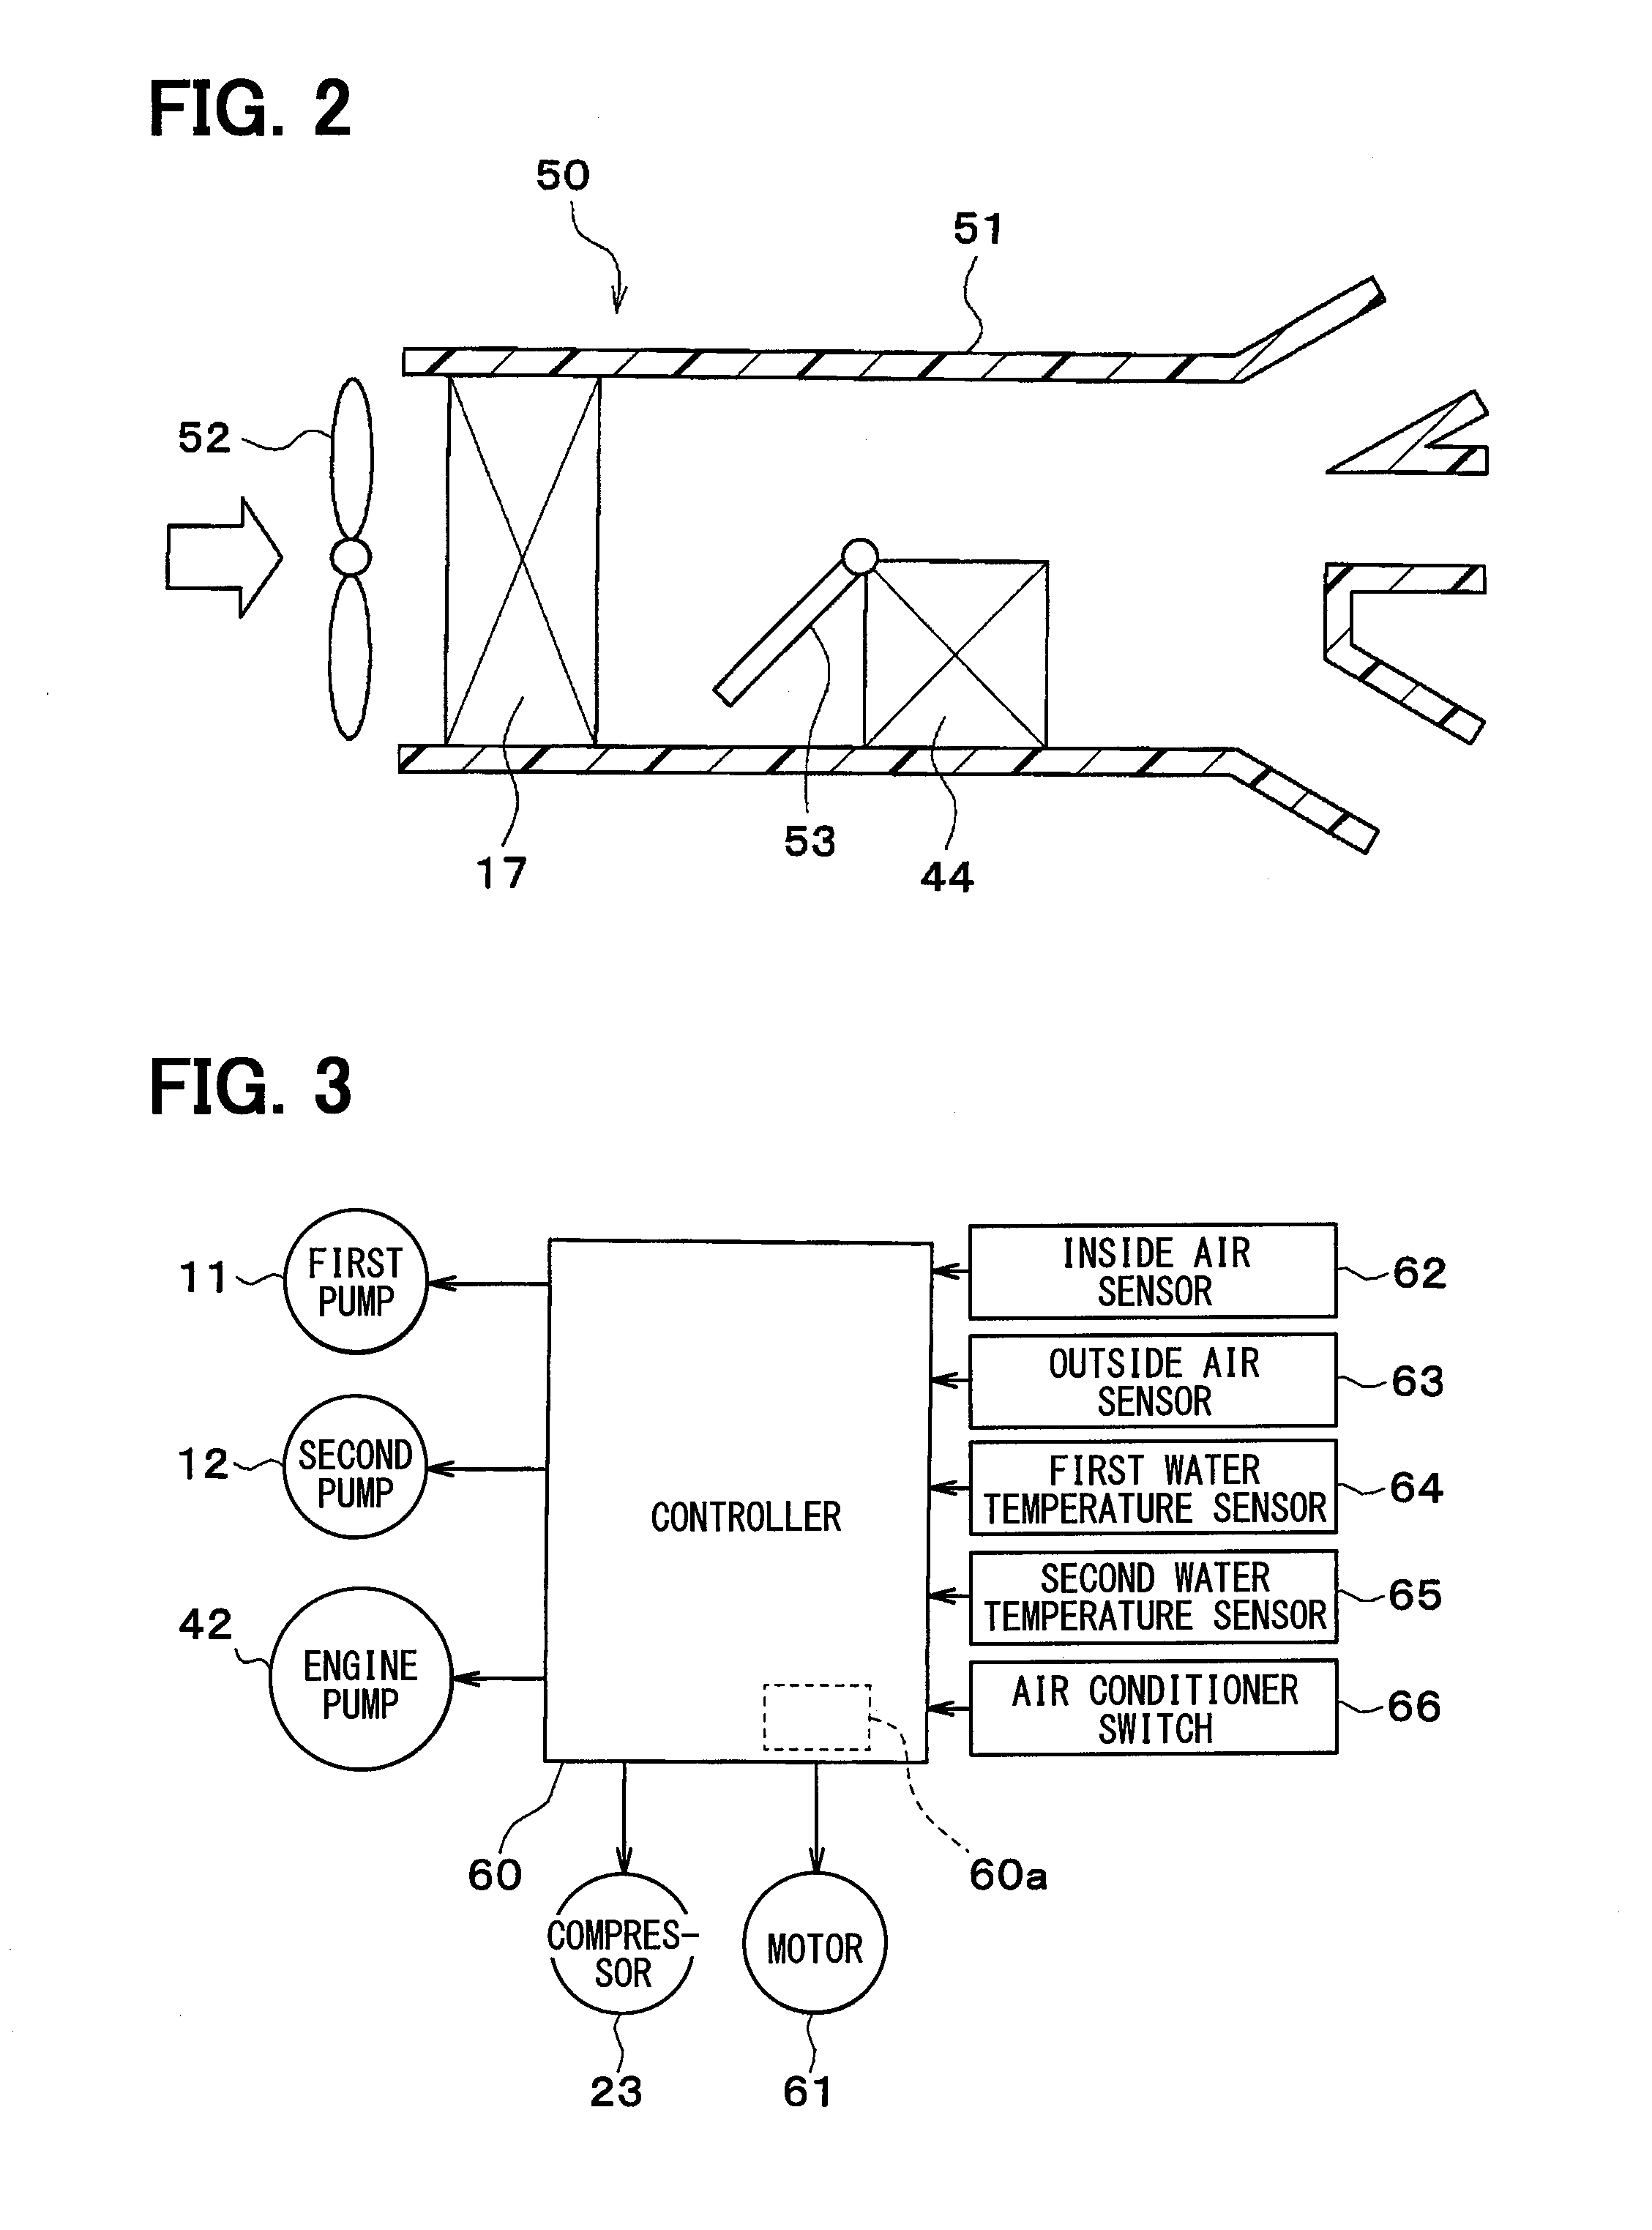 Thermal management system for vehicles